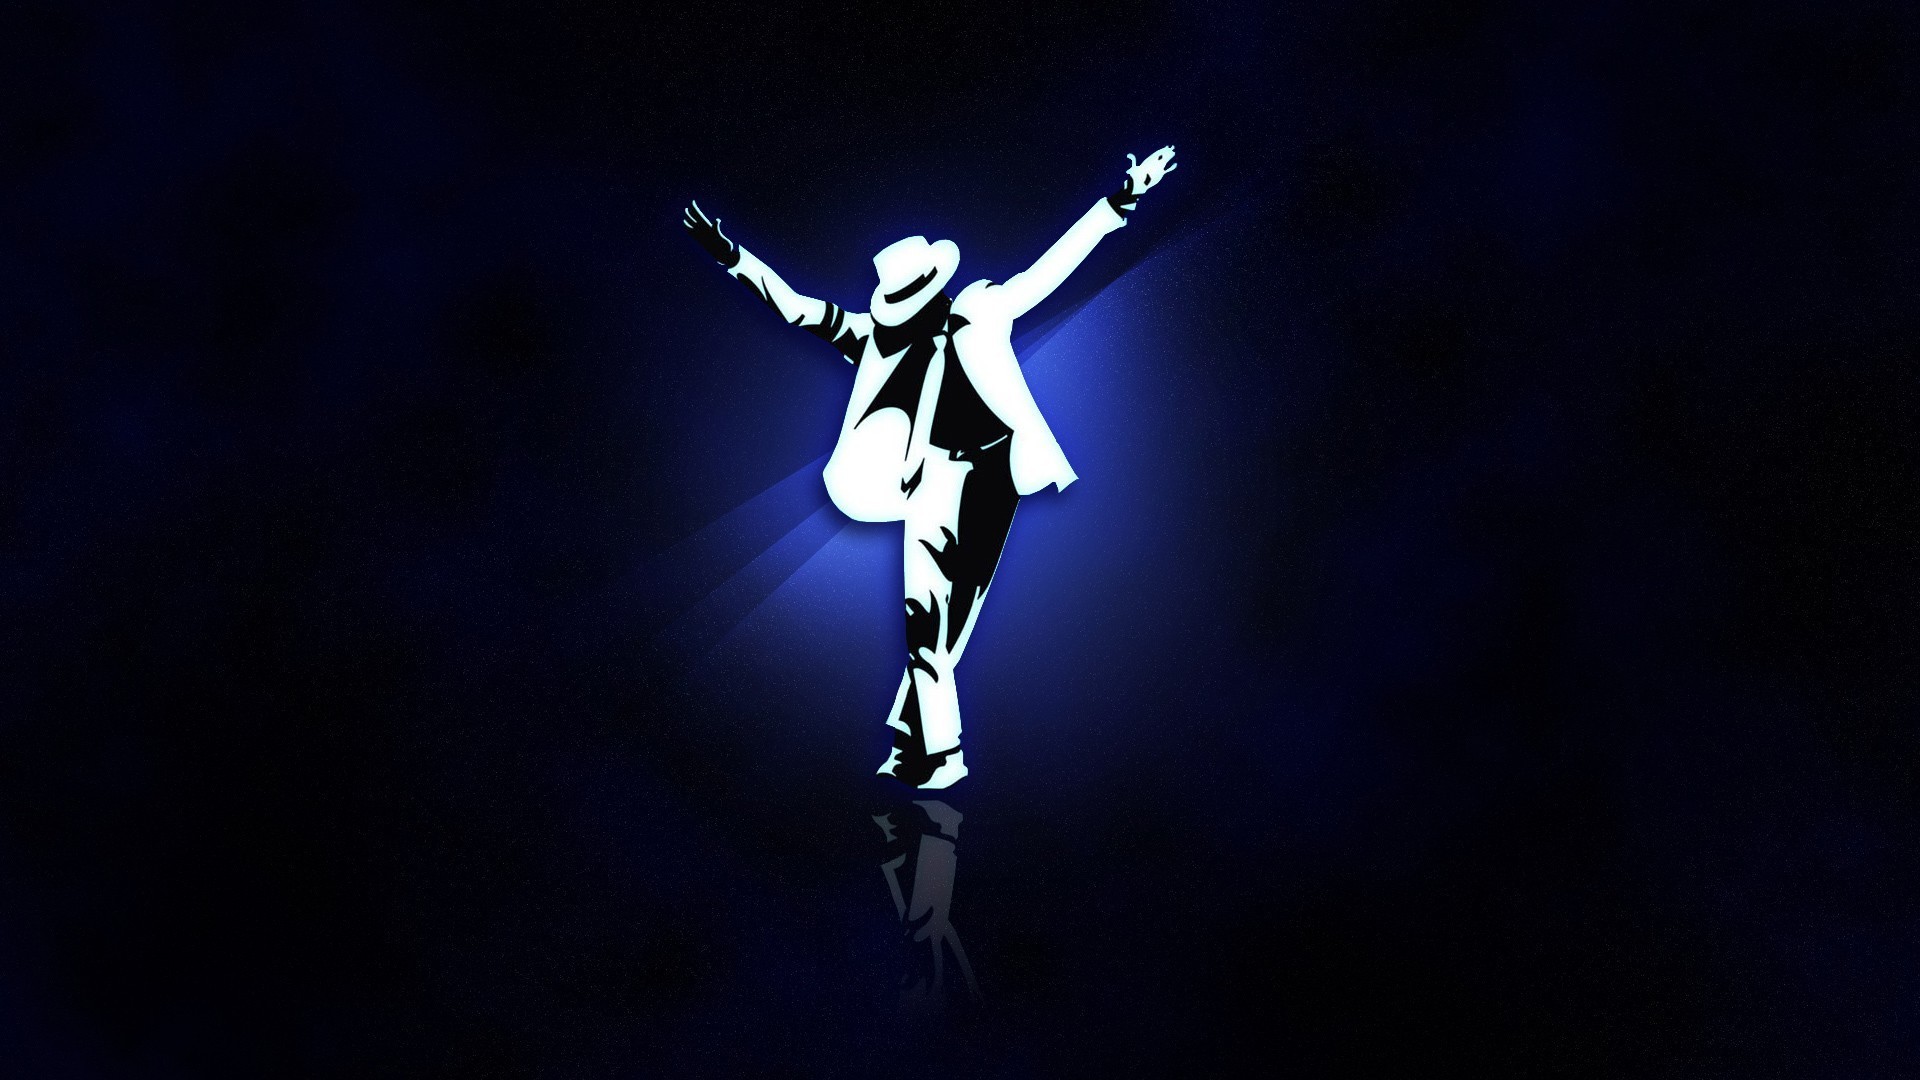 1920x1080 Michael Jackson Images Wallpapers (85 Wallpapers)